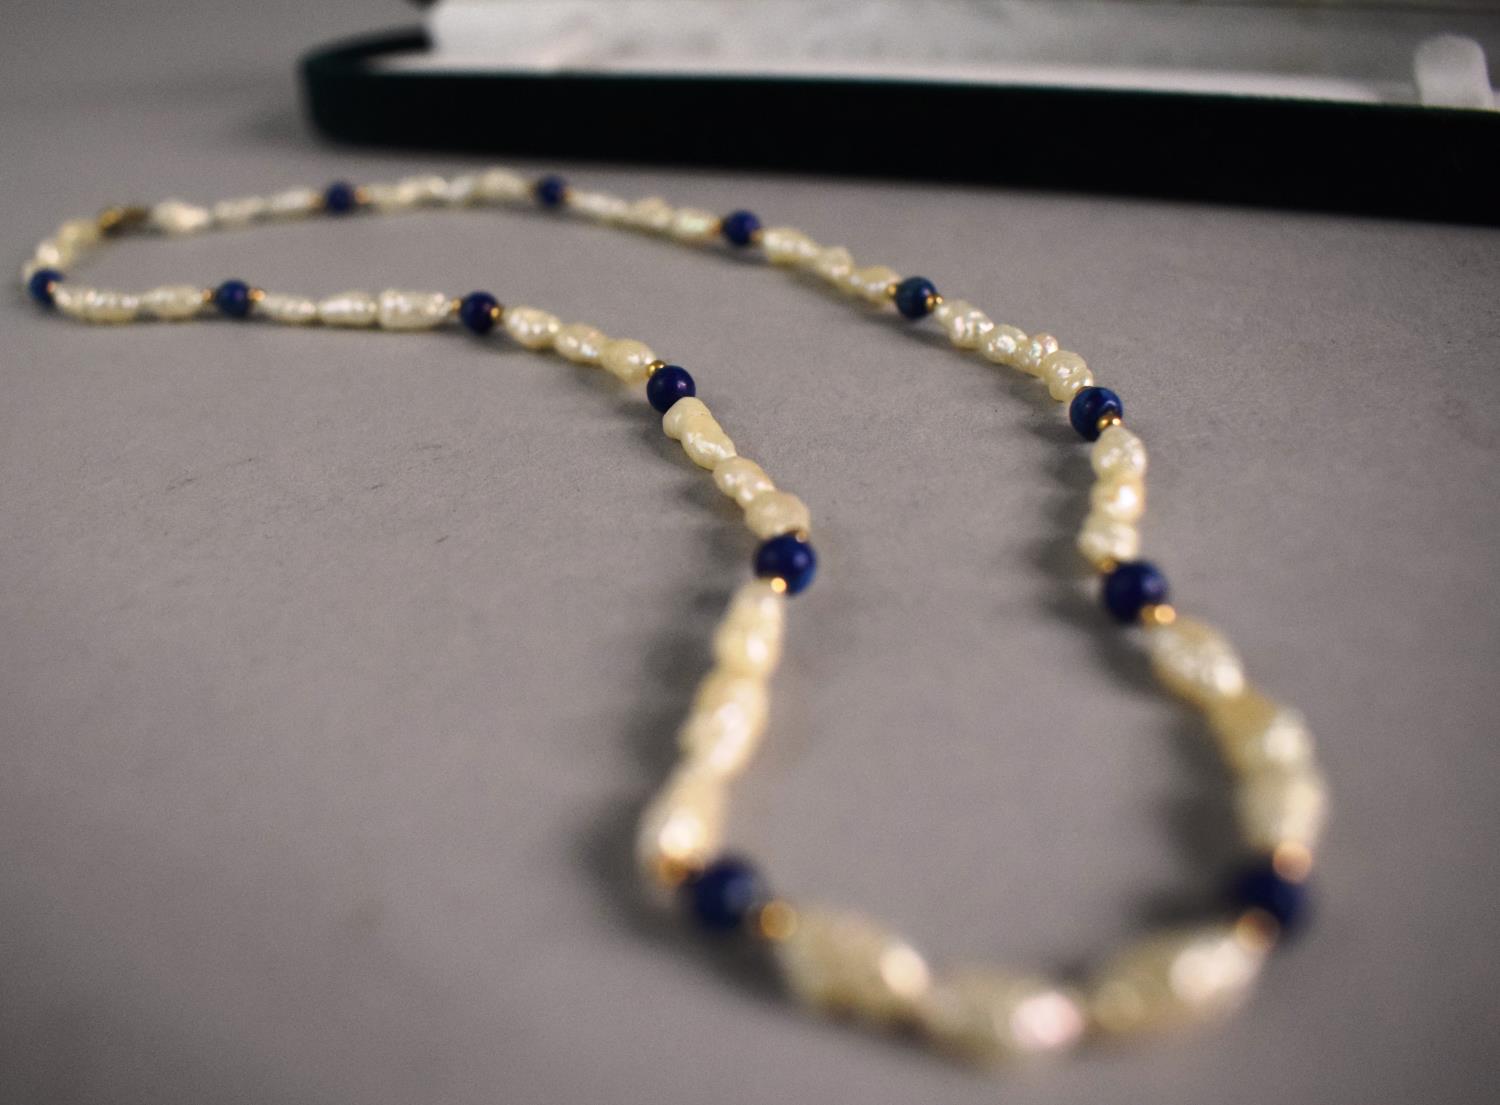 A Natural Pearl and Blue Stone Necklace with Gold Clasp - Image 2 of 2